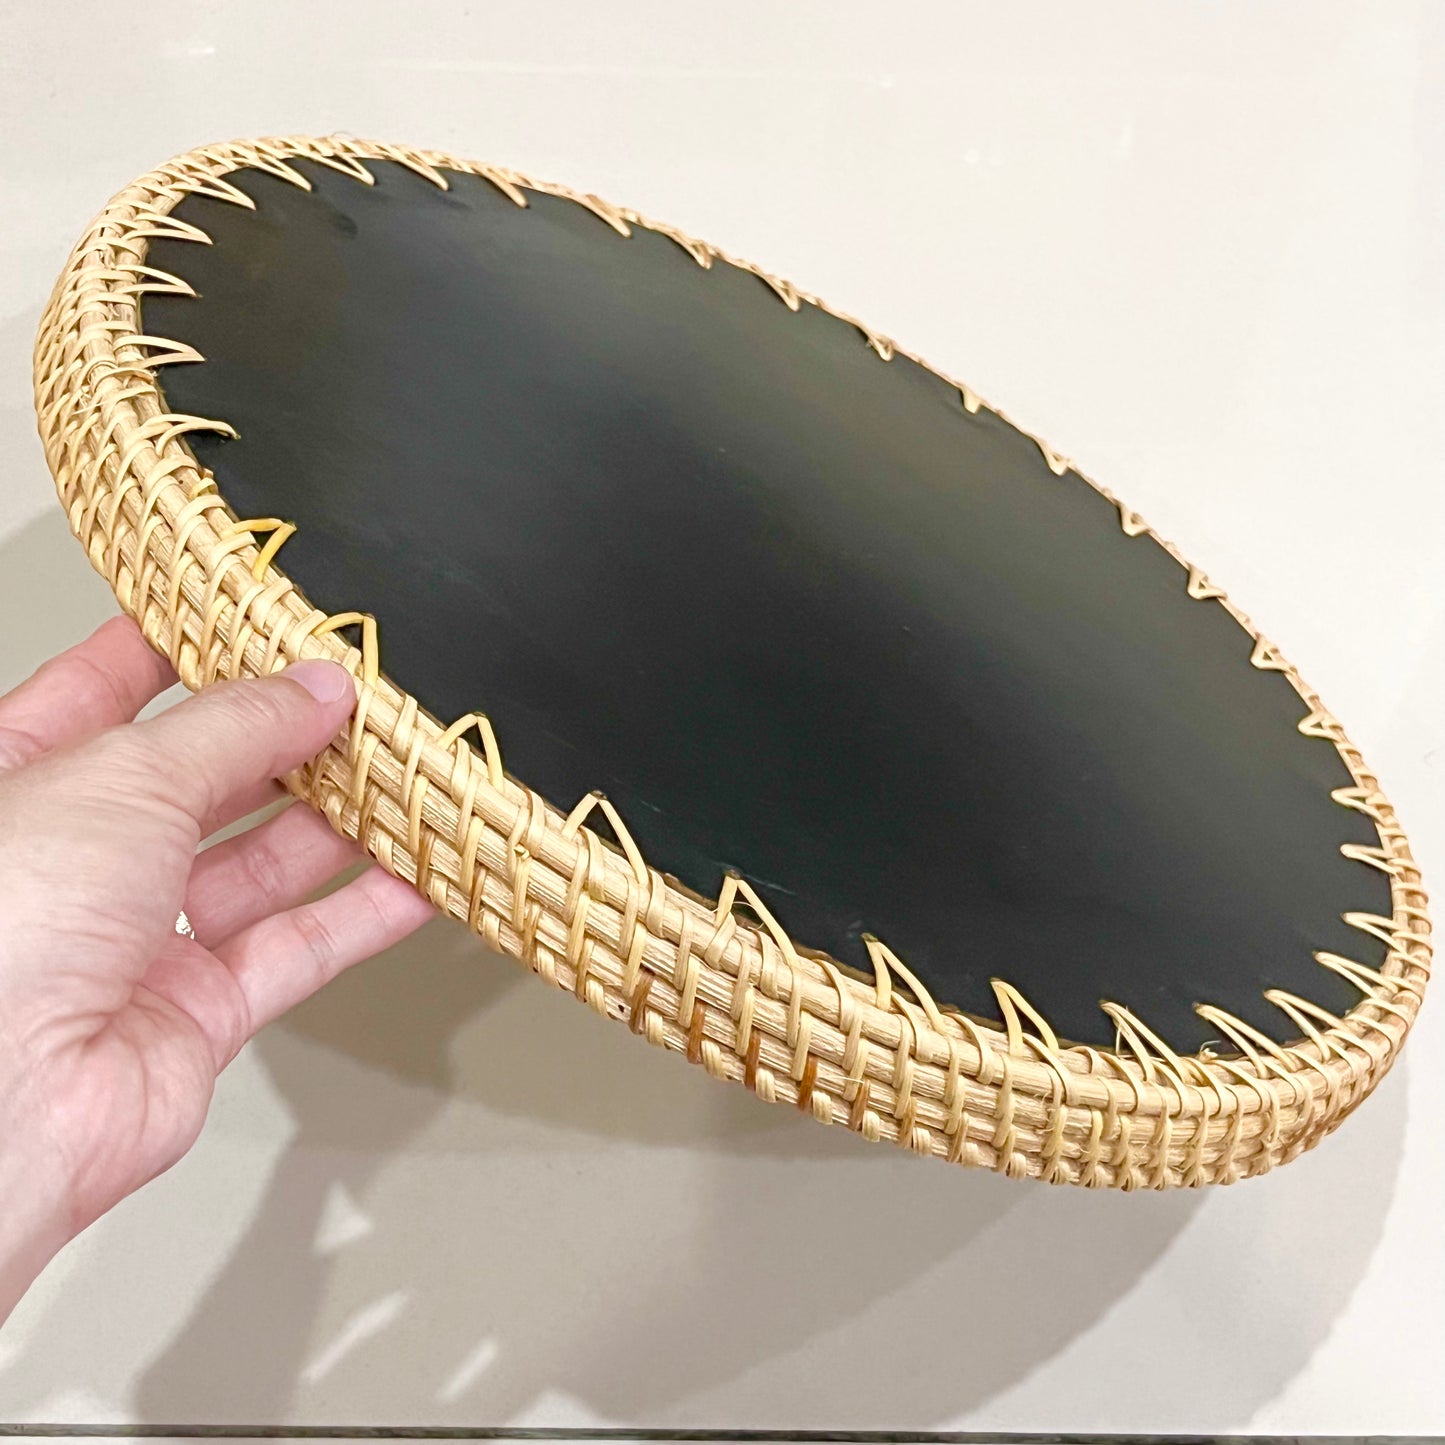 Aqua flower Hand-woven Rattan & Mother Pearl Inlay Round Decoration Serving Tray